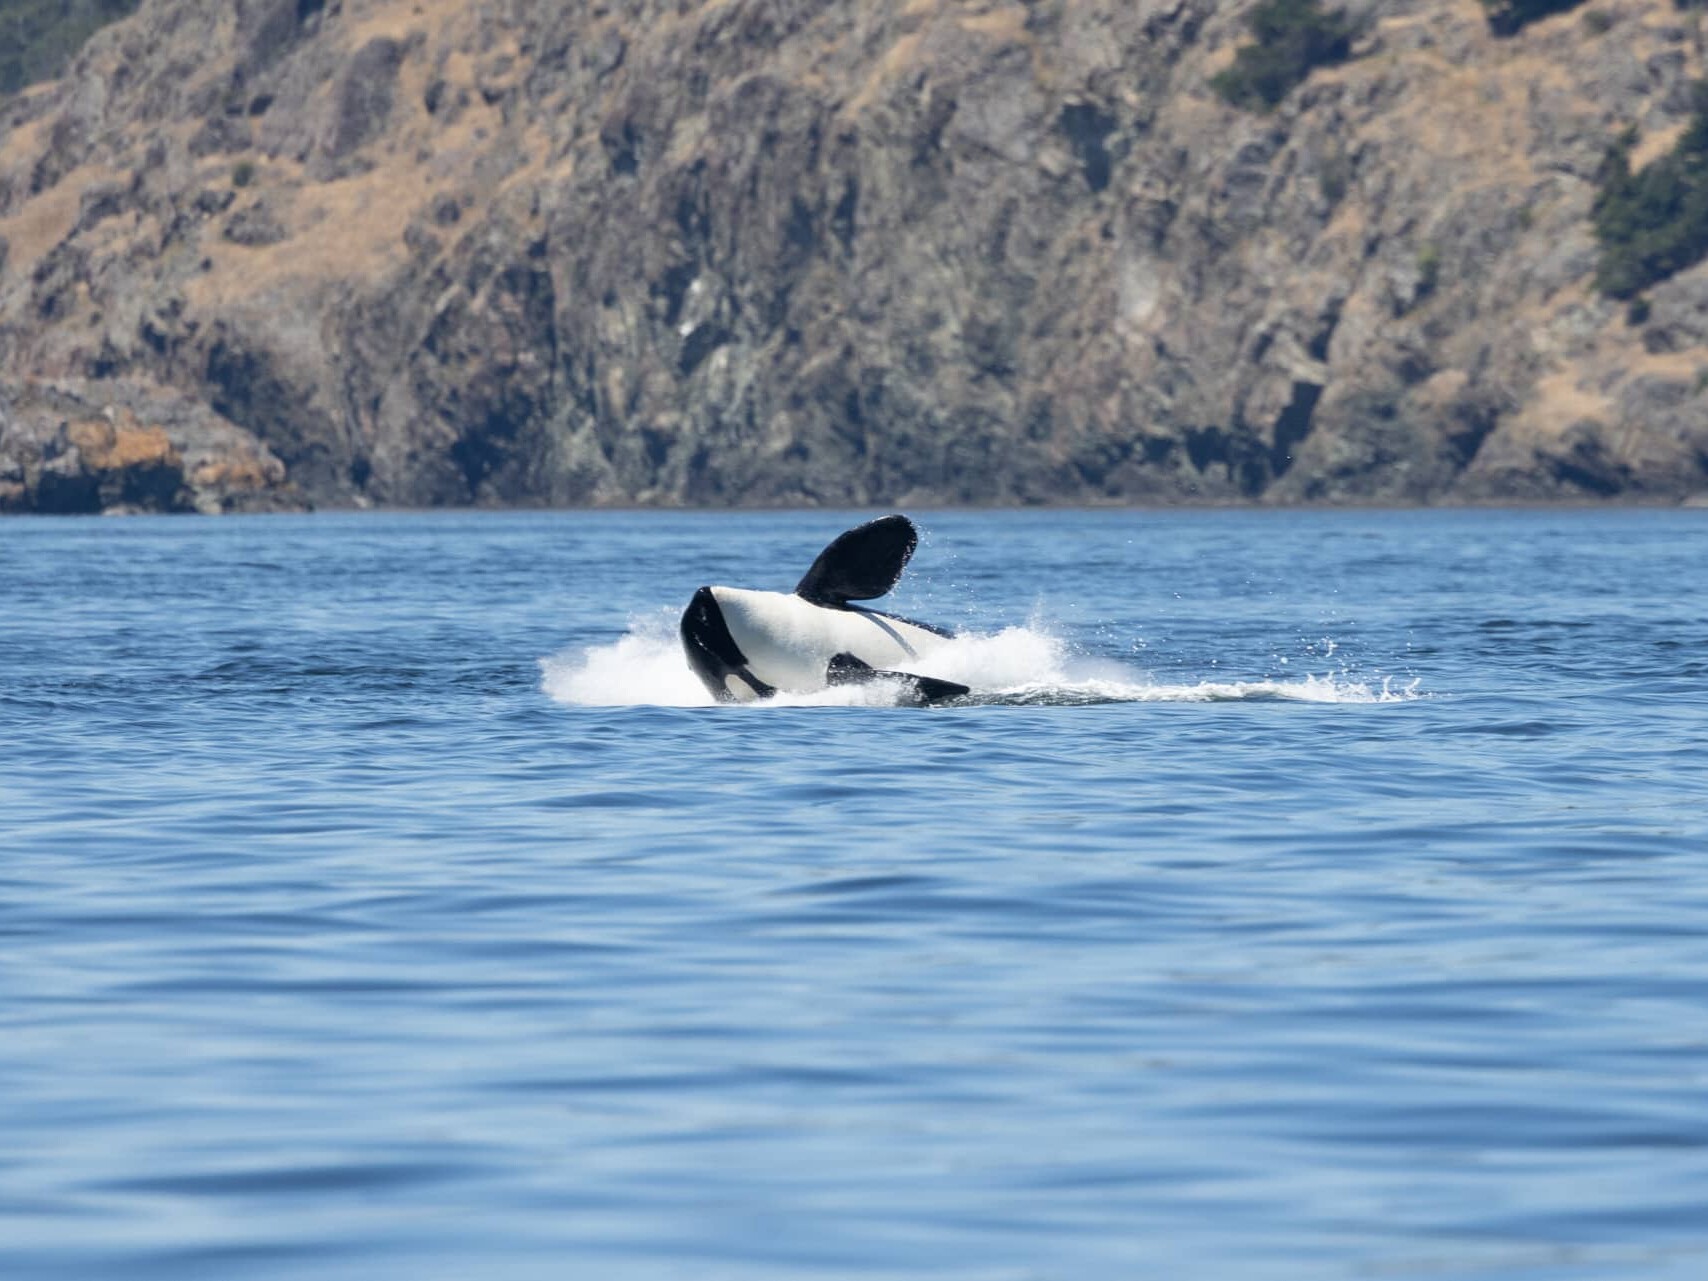 A breaching southern resident killer whale